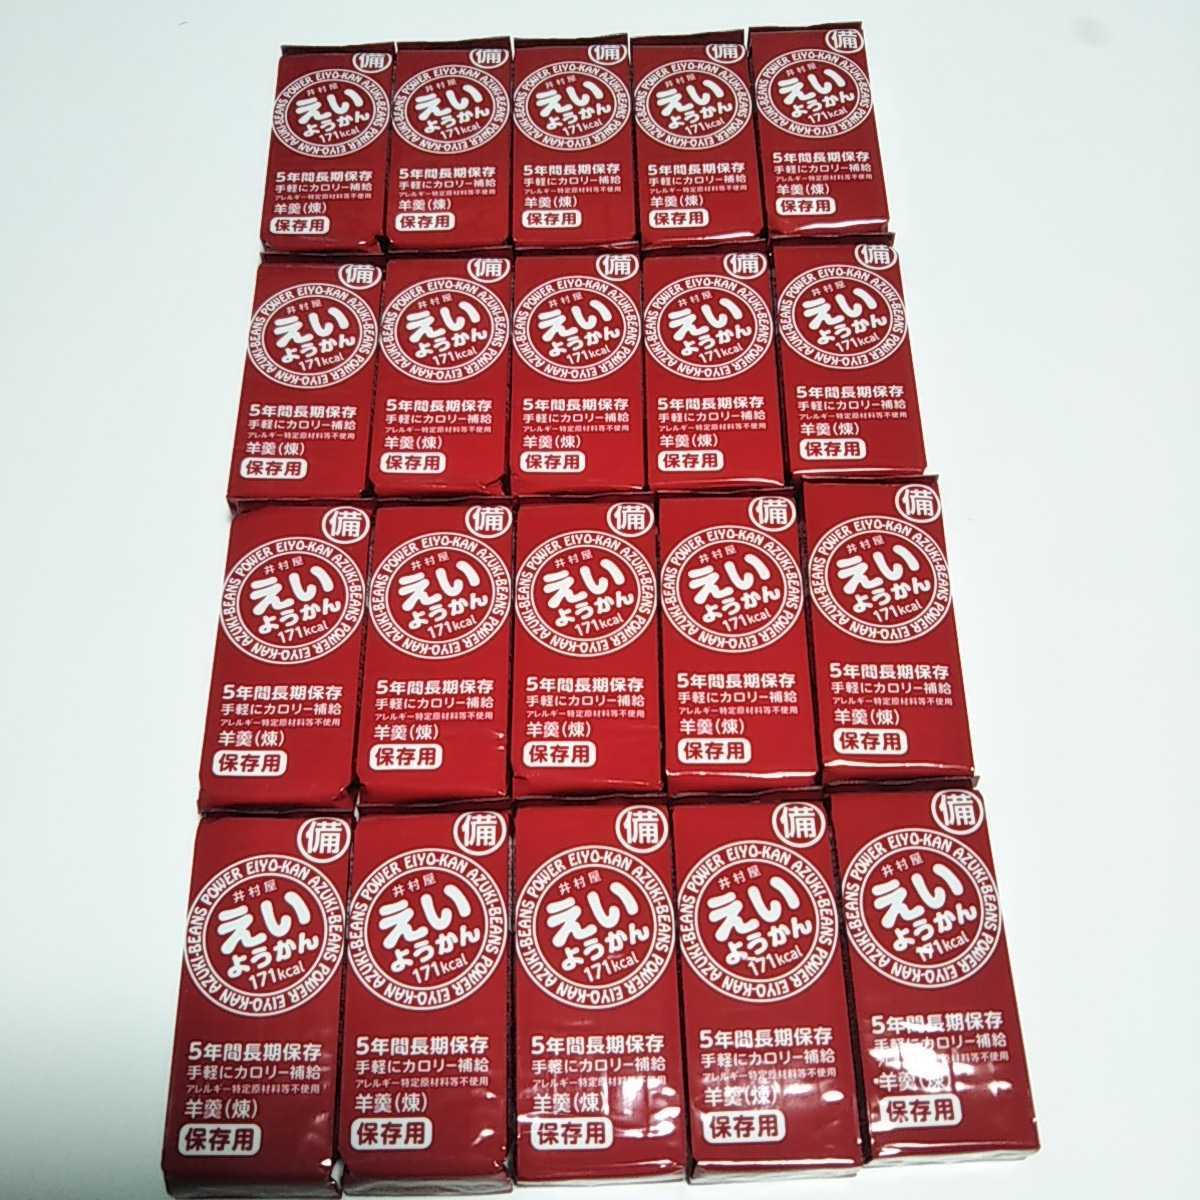 20ps.@.. bean jam jelly .. shop .. meal preservation meal emergency rations 5 year ..